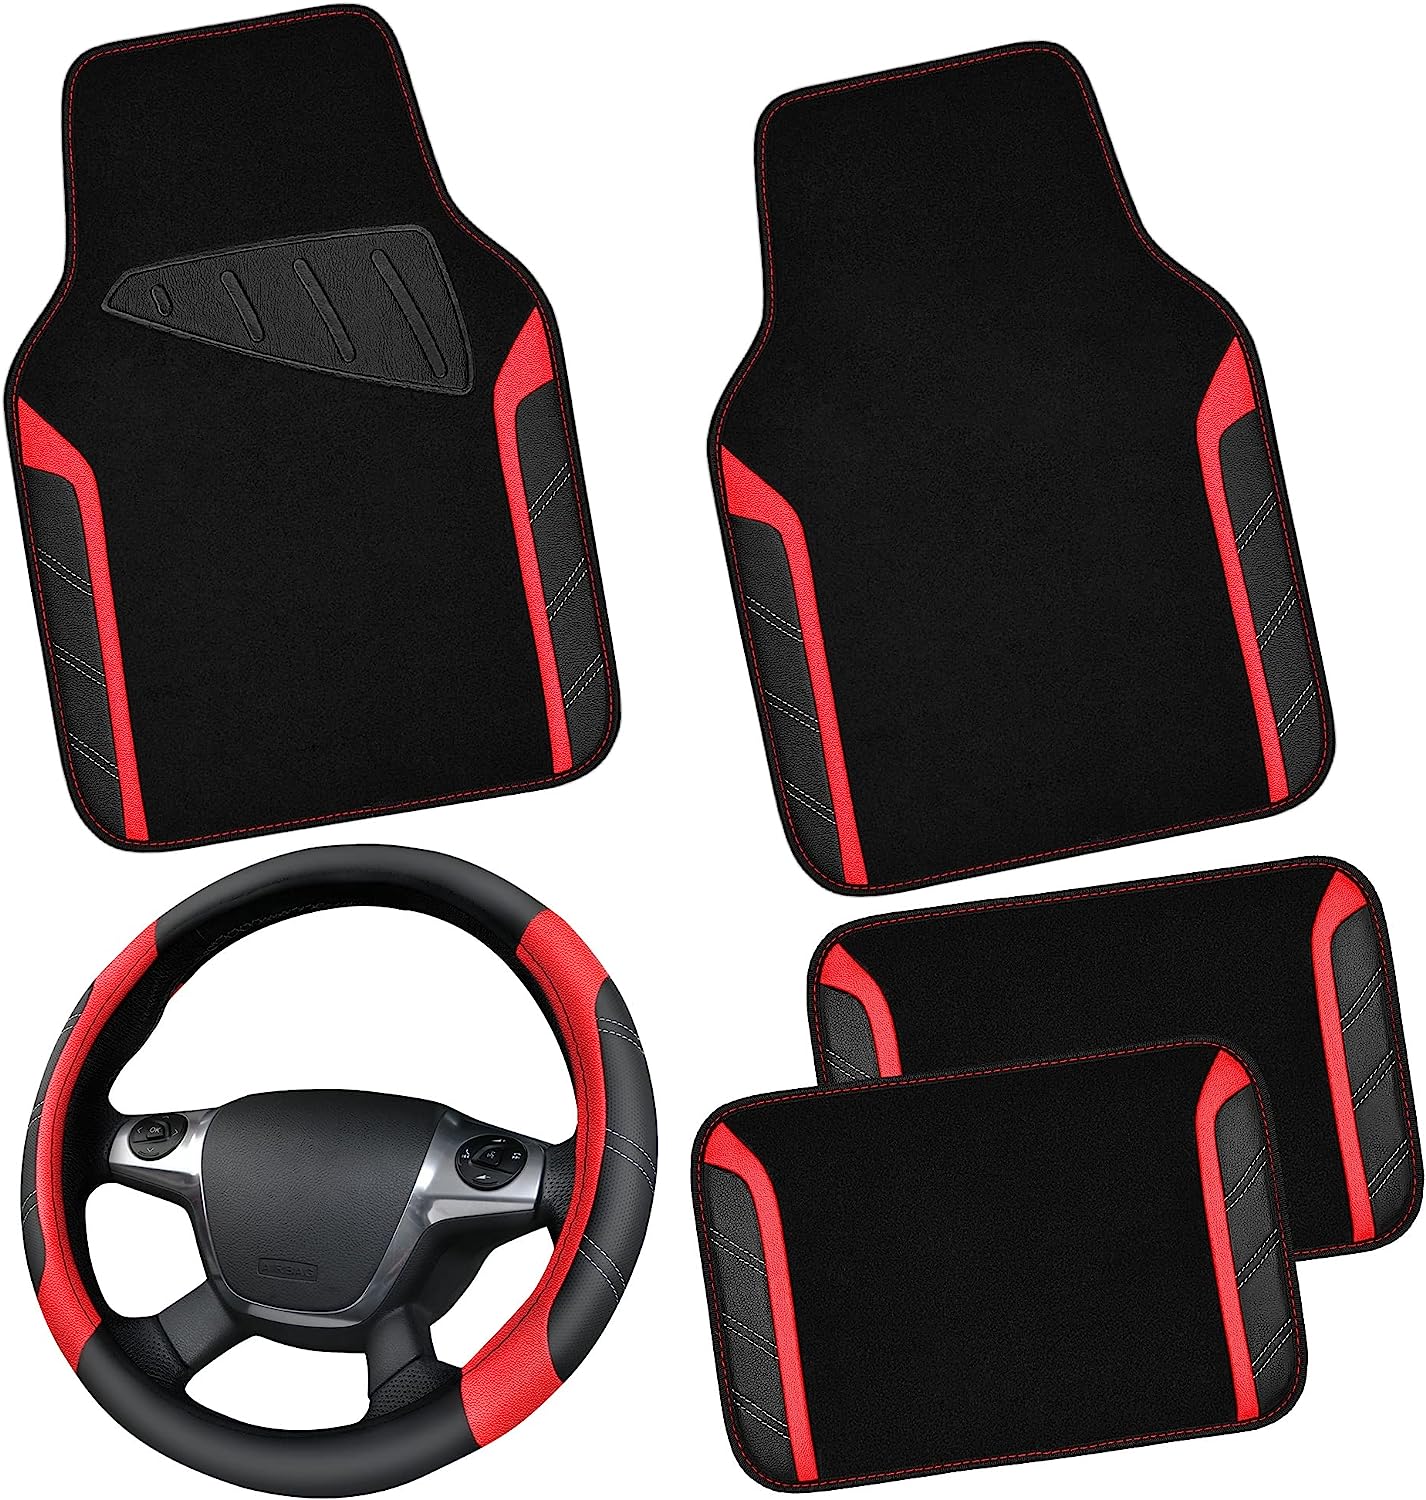 CAR PASS Leather Steering Wheel Cover, Car Floor Mats and Leather Seat Covers Full Set All Coverage Cushioned Universal Fit for SUV, Cars, Van, Sporty (Black and Red)